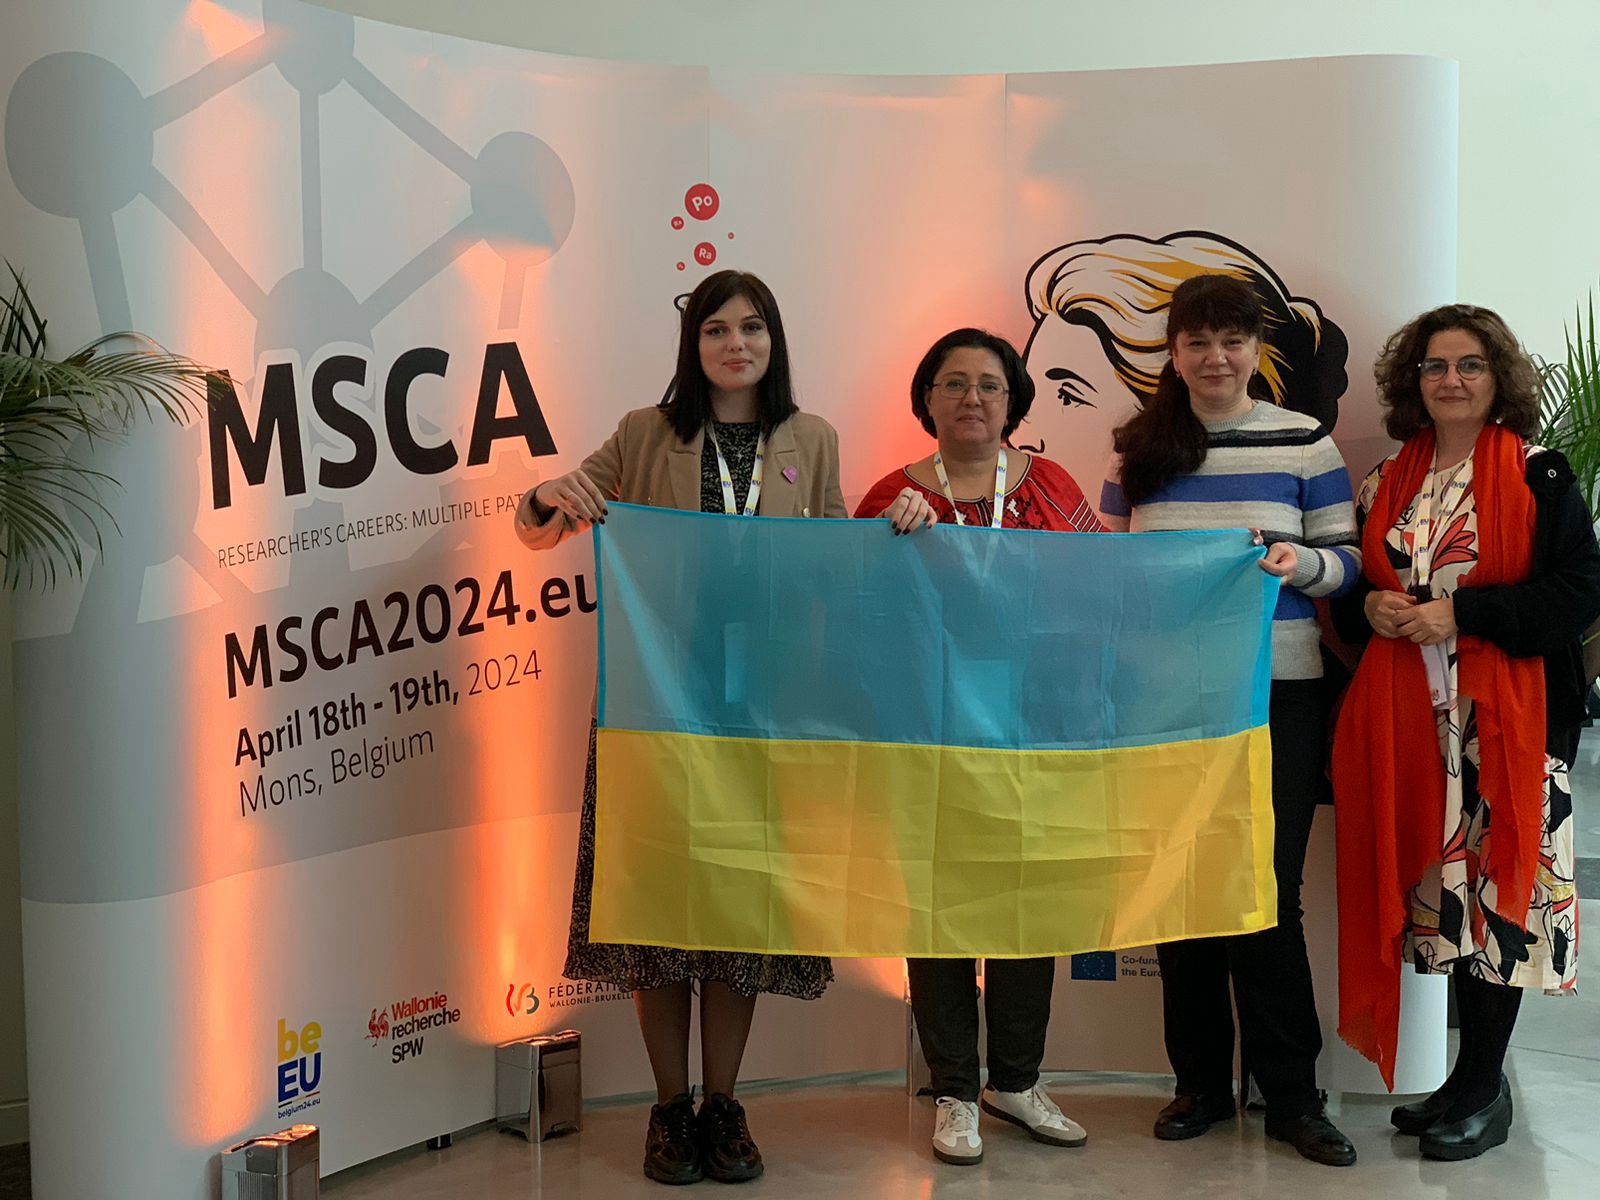 Horizon Europe Office in Ukraine NRFU is an integral part of European cooperation and partnership: MSCA Conference 2024